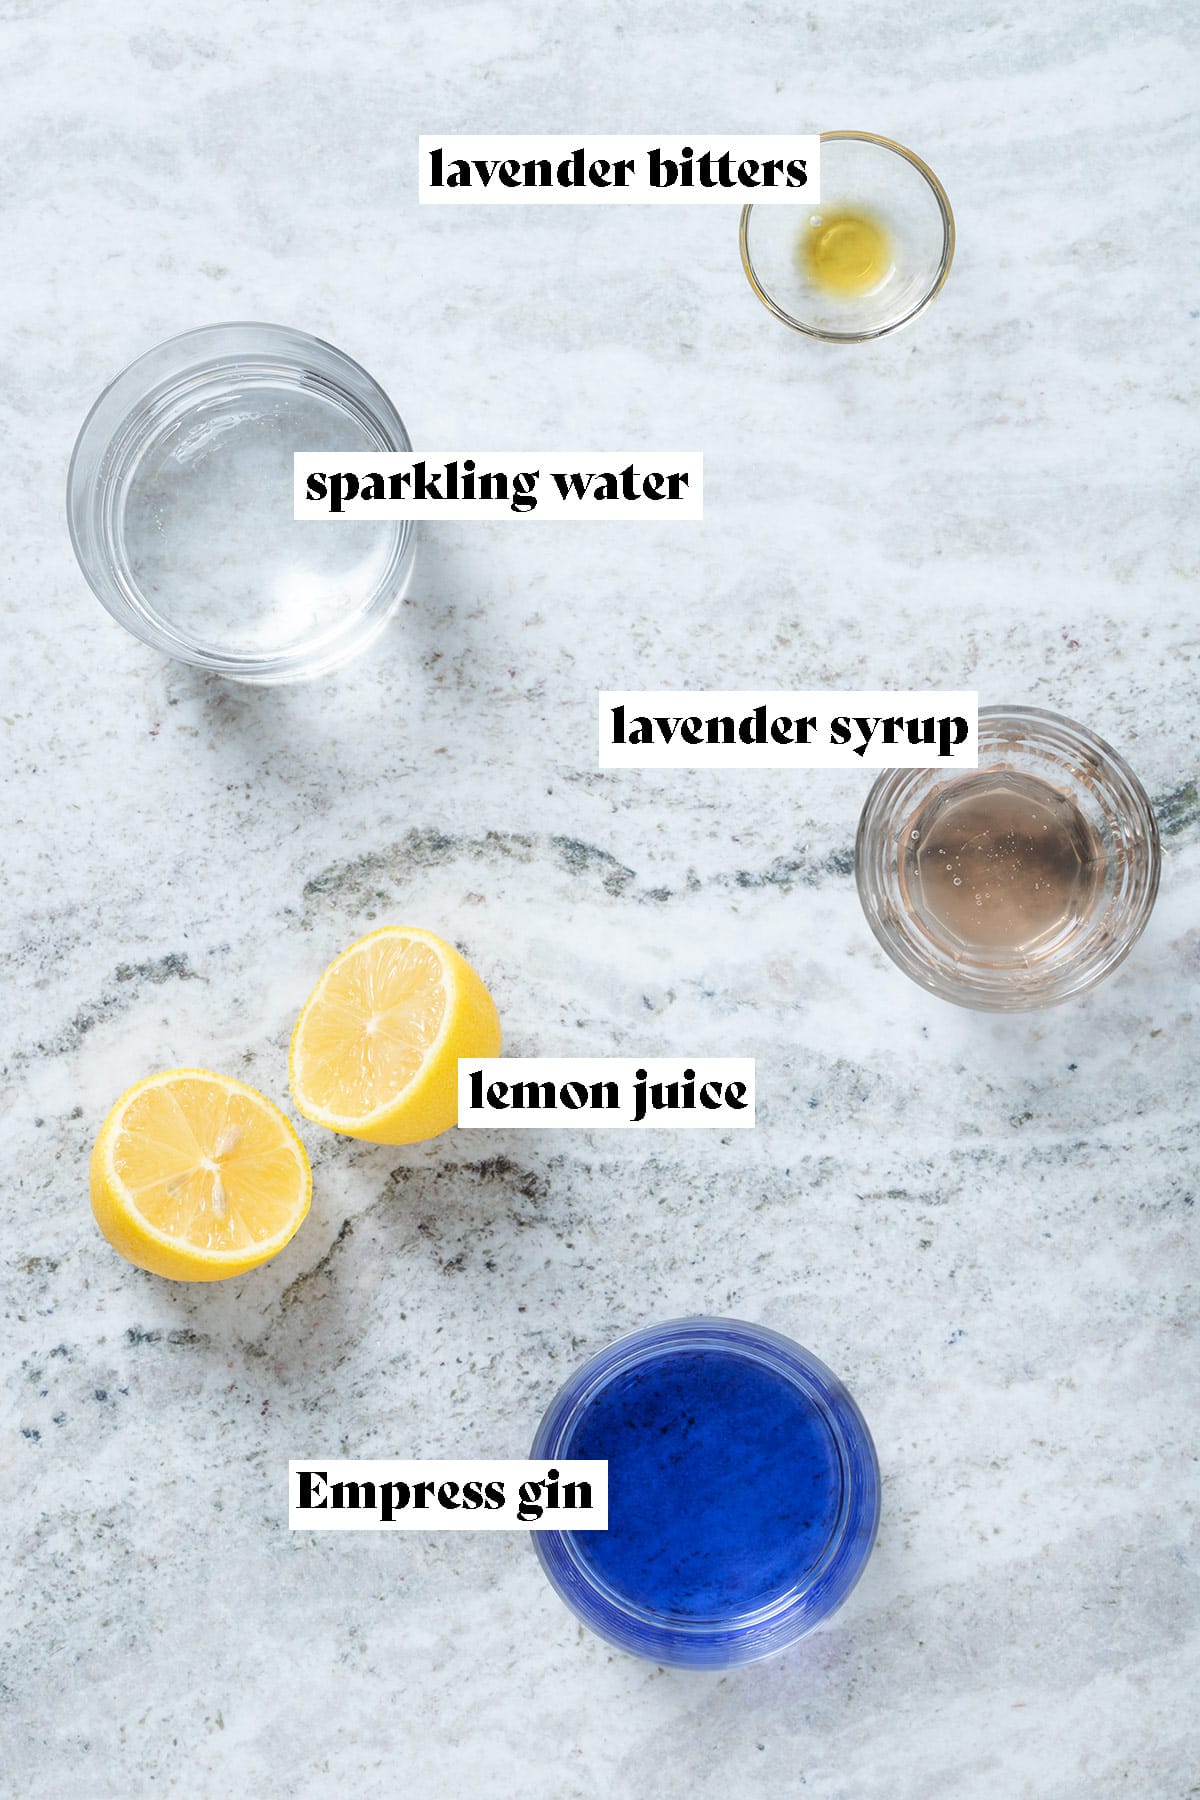 Lemon, gin, syrup, and bitters all measured out and laid out on a grey background with text overlay.